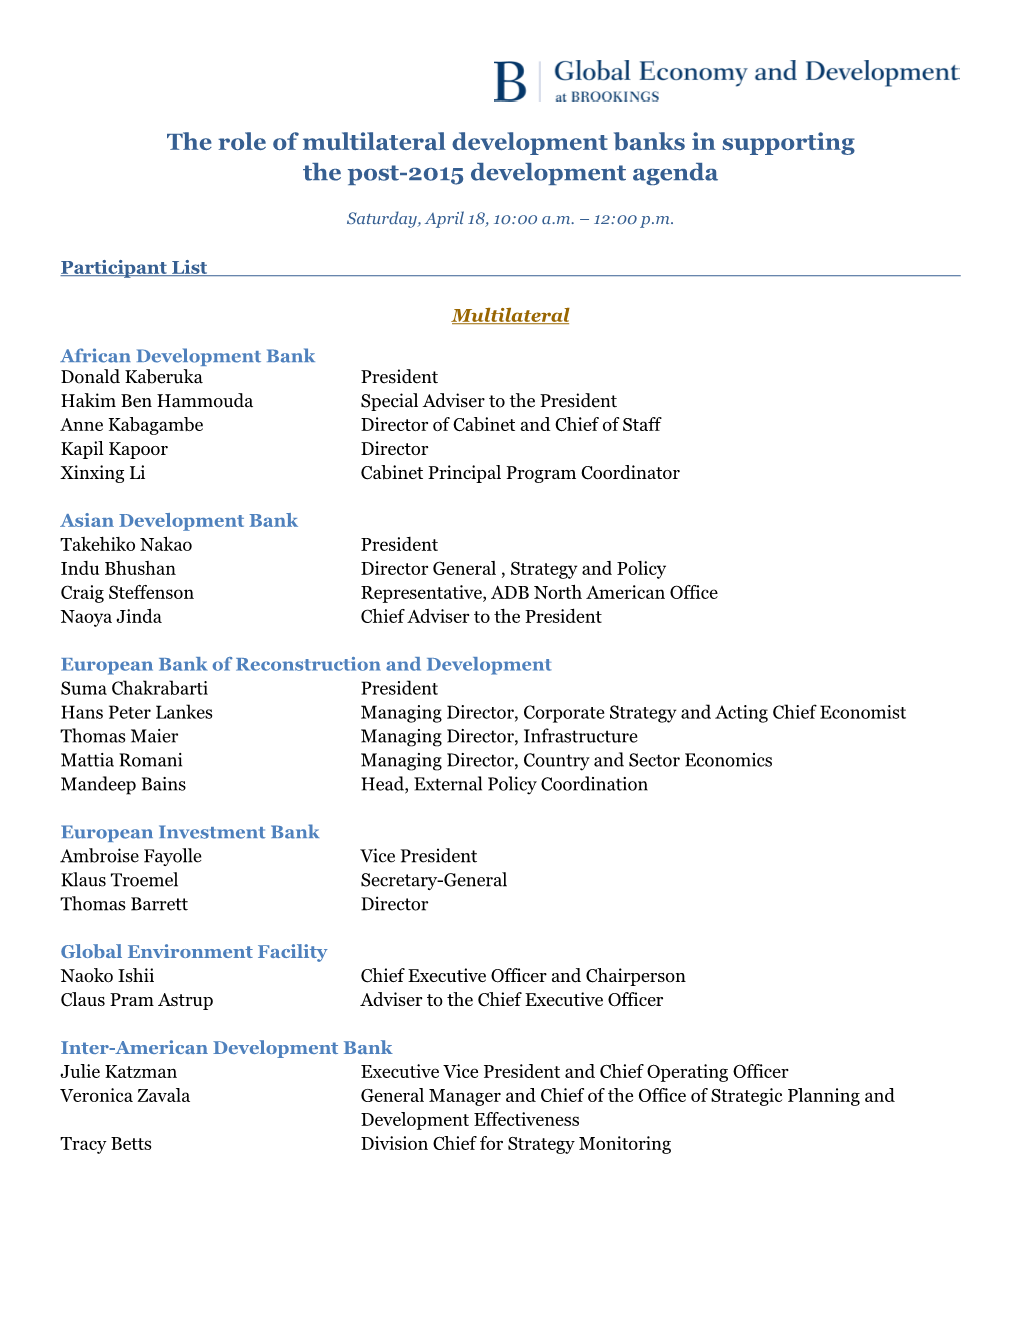 The Role of Multilateral Development Banks in Supporting the Post-2015 Development Agenda